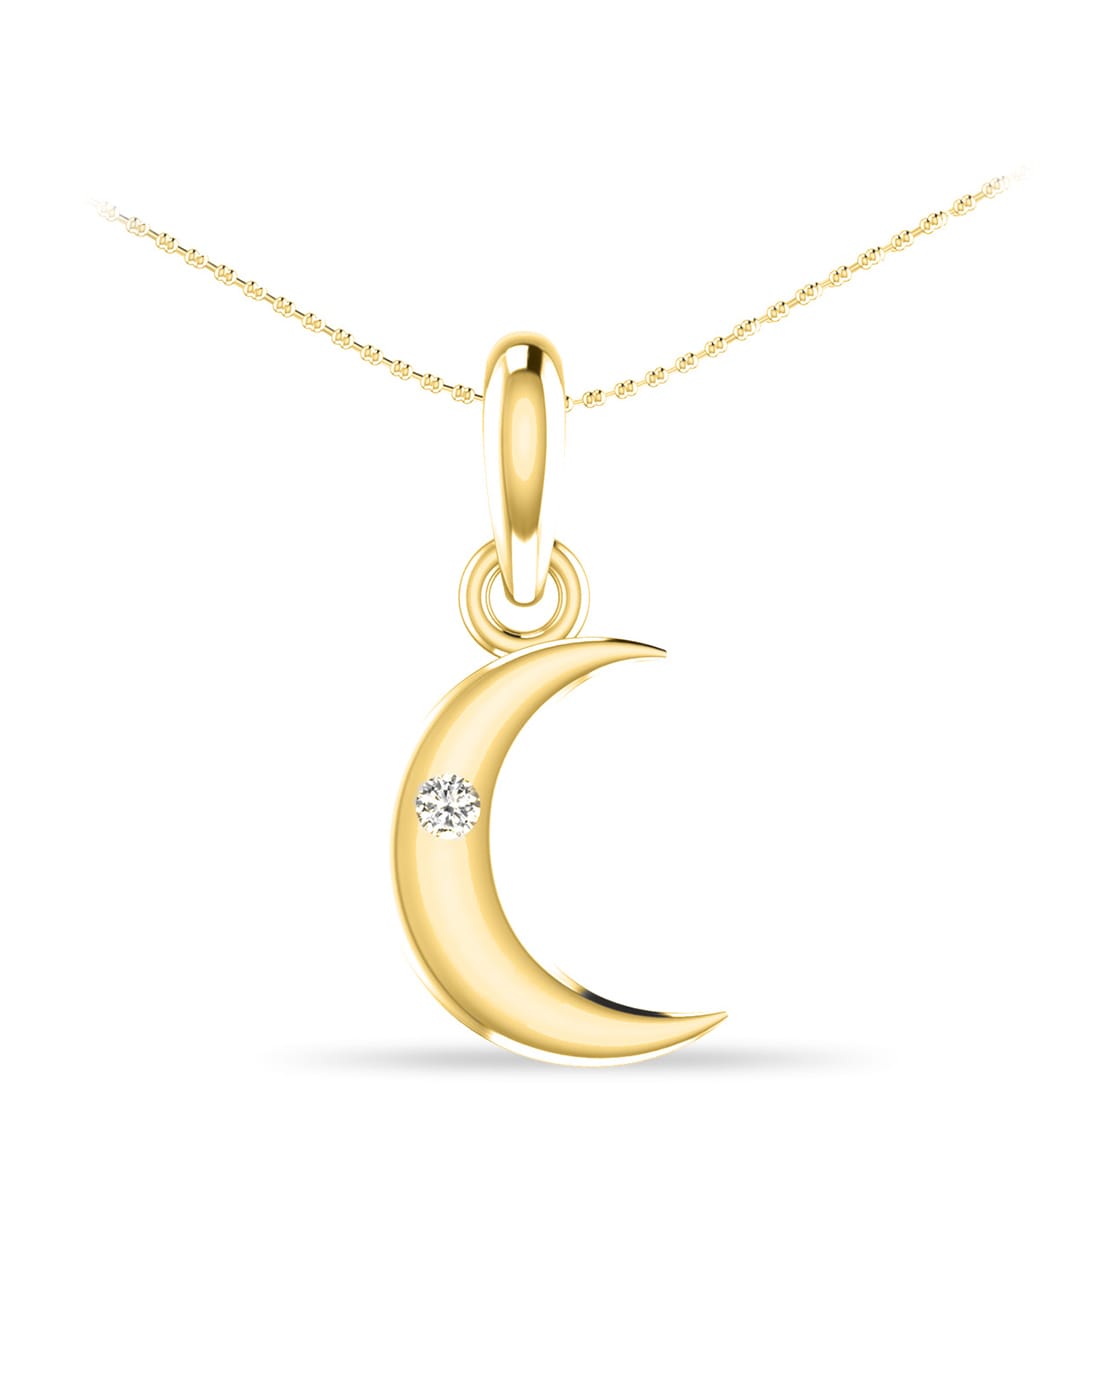 Gold Crescent Moon Necklace | Classy Women Collection